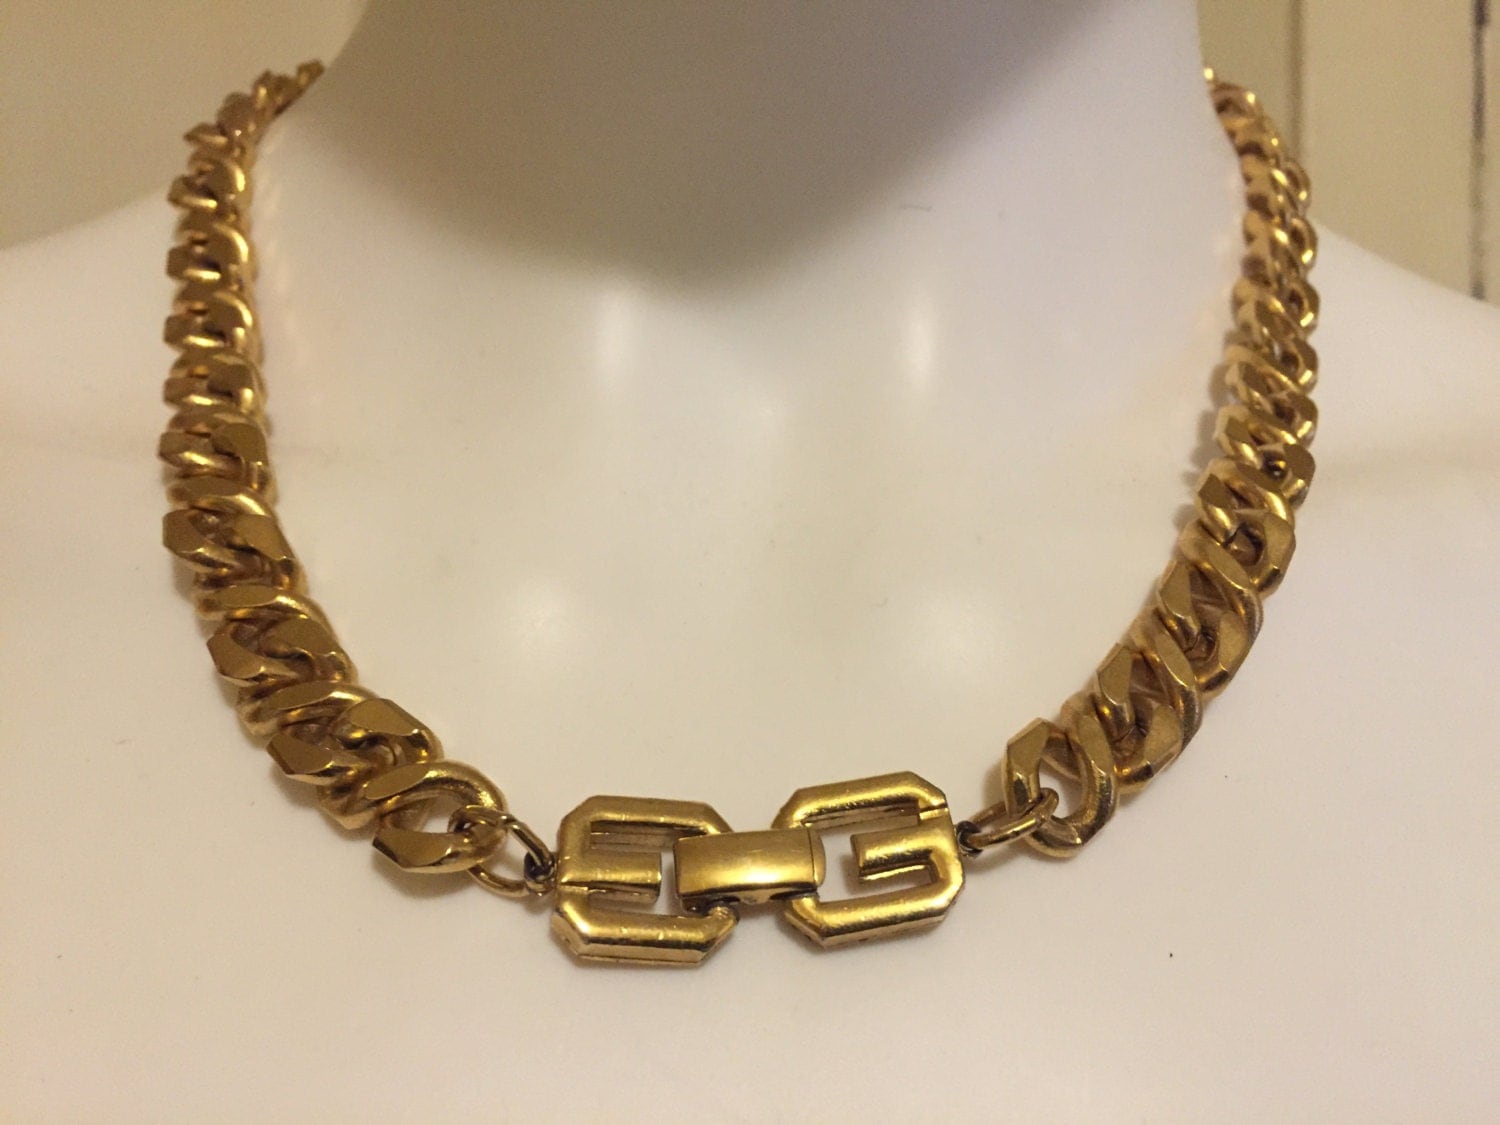 GIVENCHY vintage necklace gold chain logo clasp gg by AGORAPHOBE